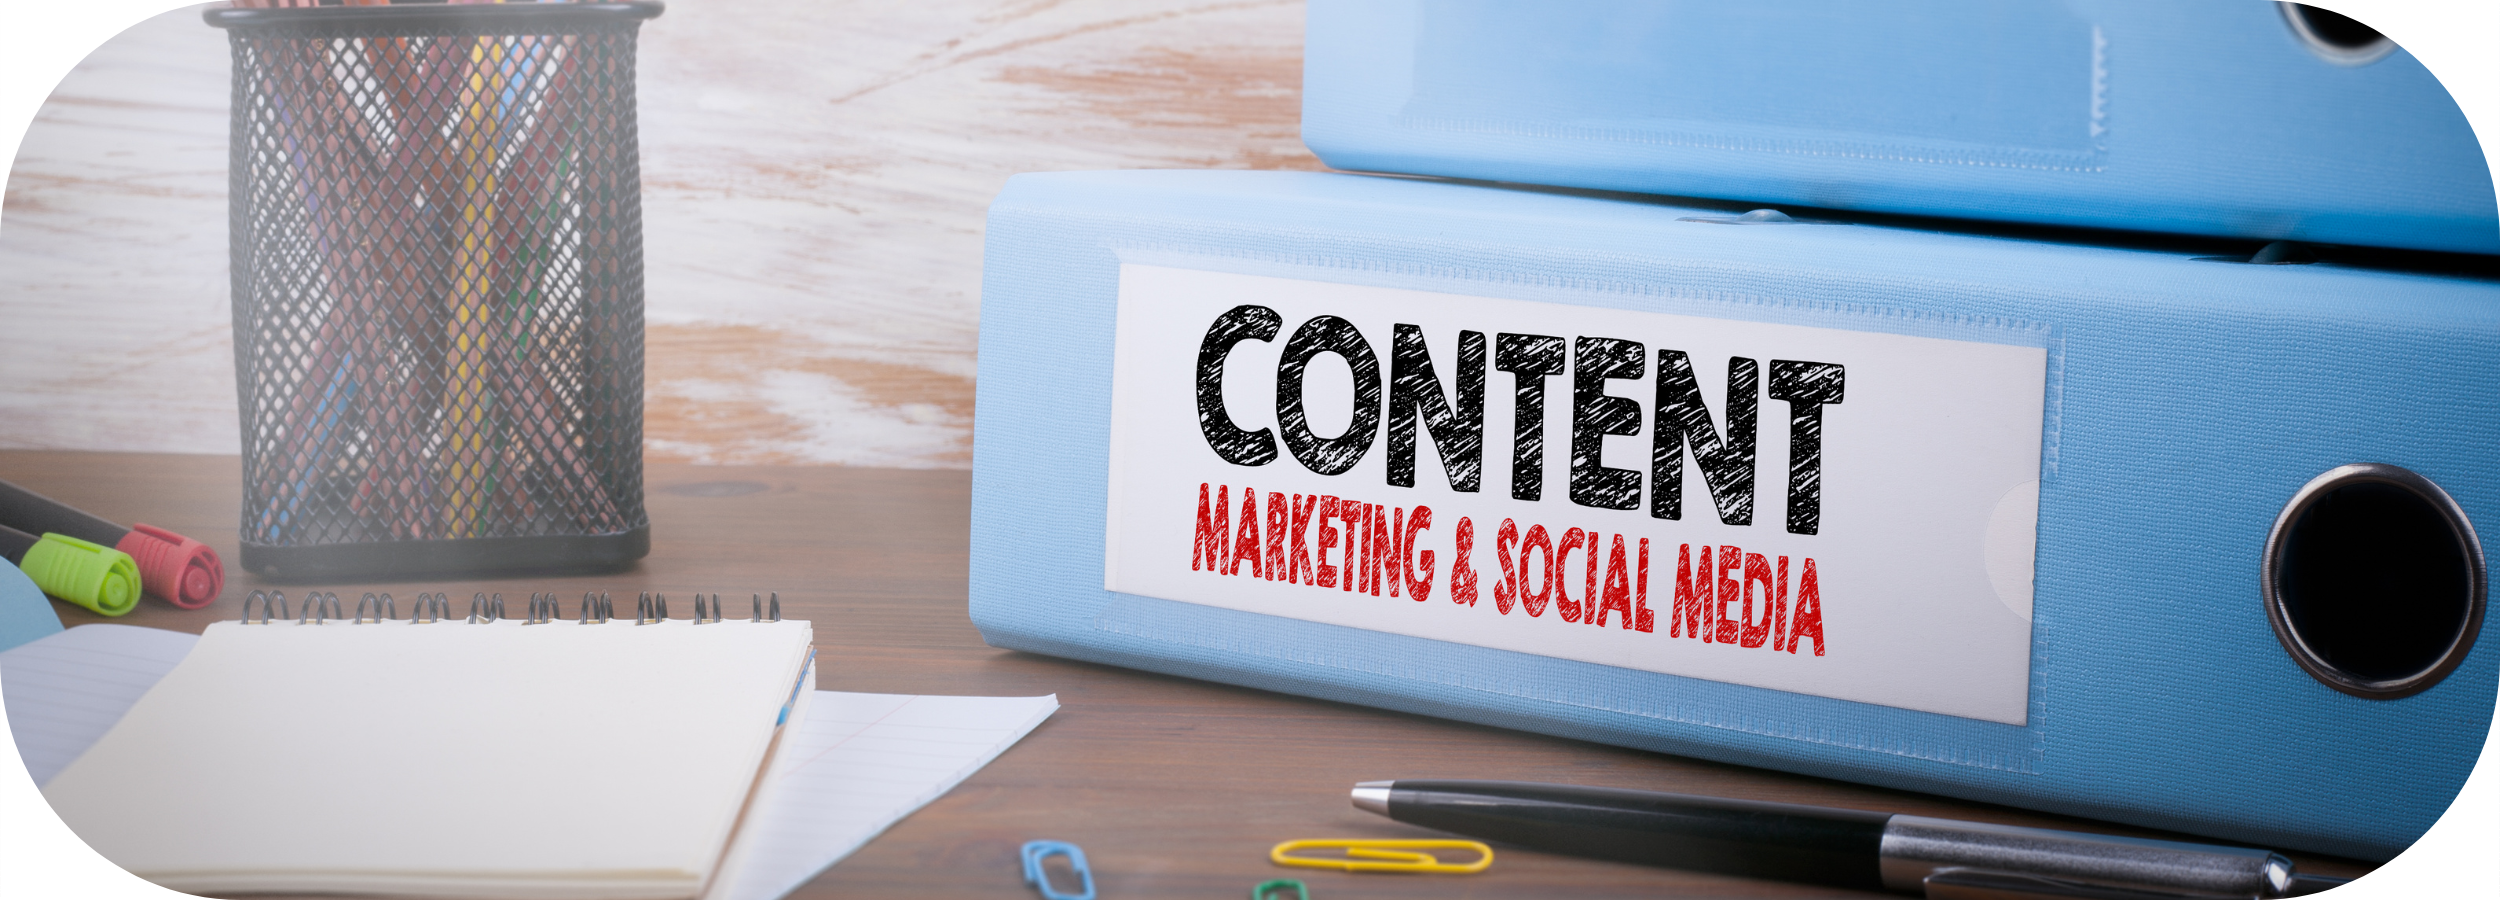 content marketing and social media